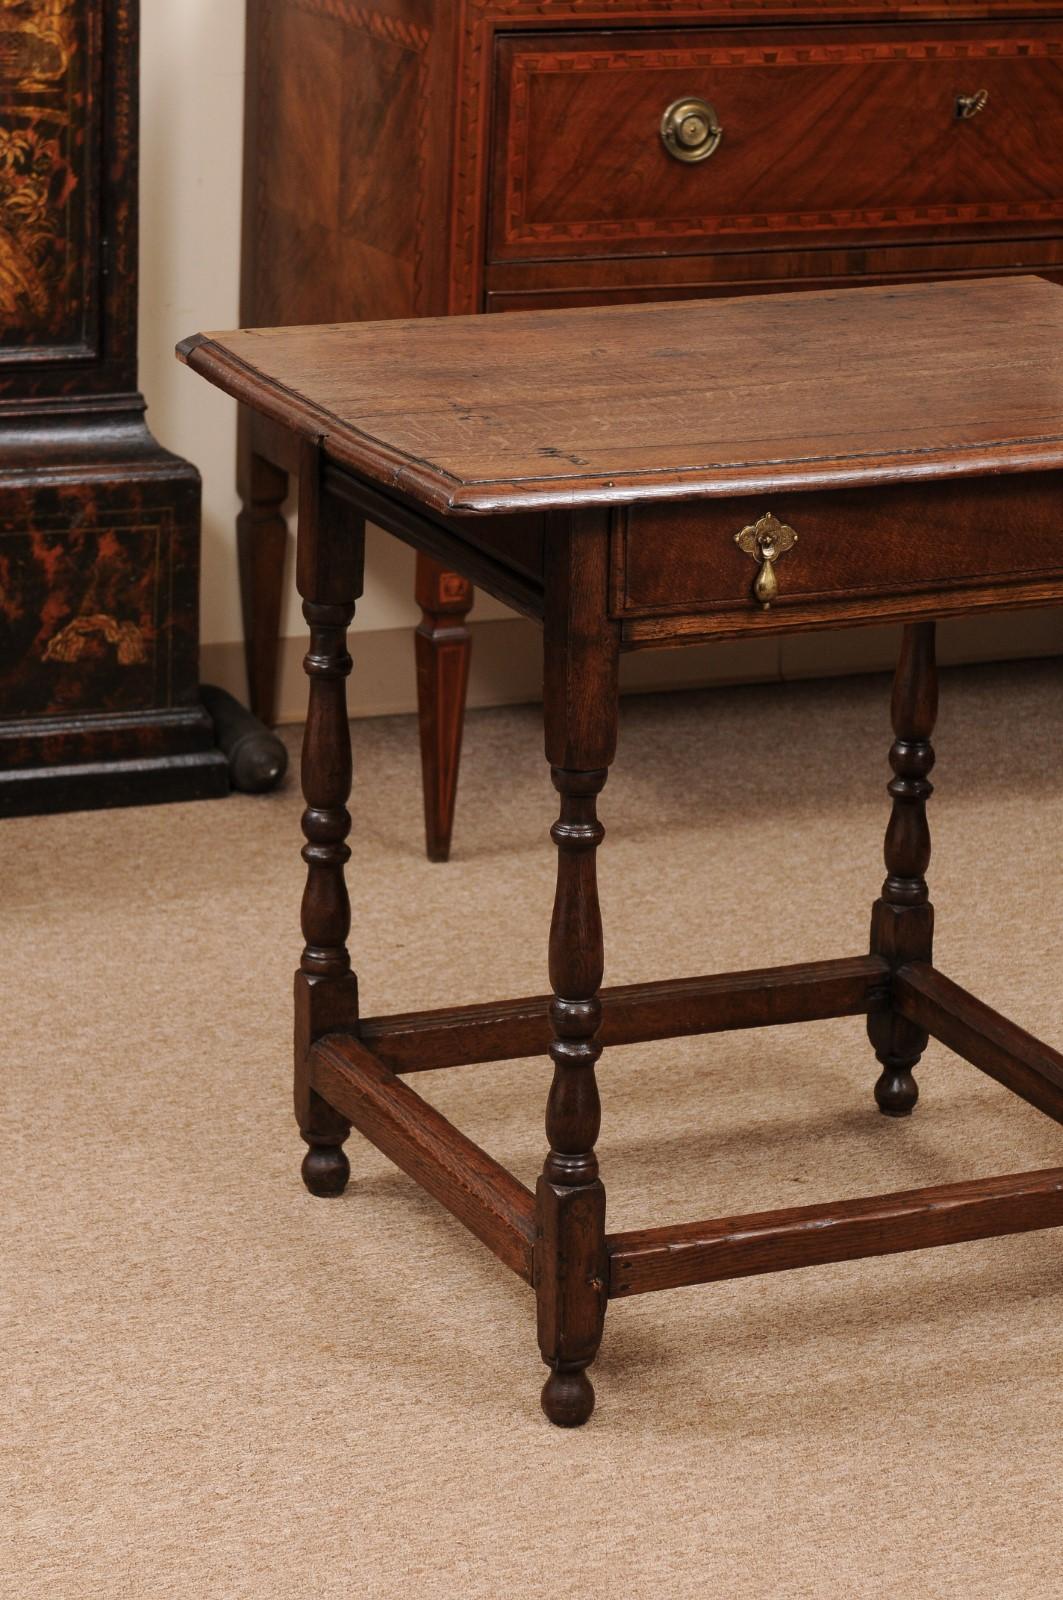 Wood English 18th century Side Table with 1 Drawer, Turned Legs & Box Stretcher